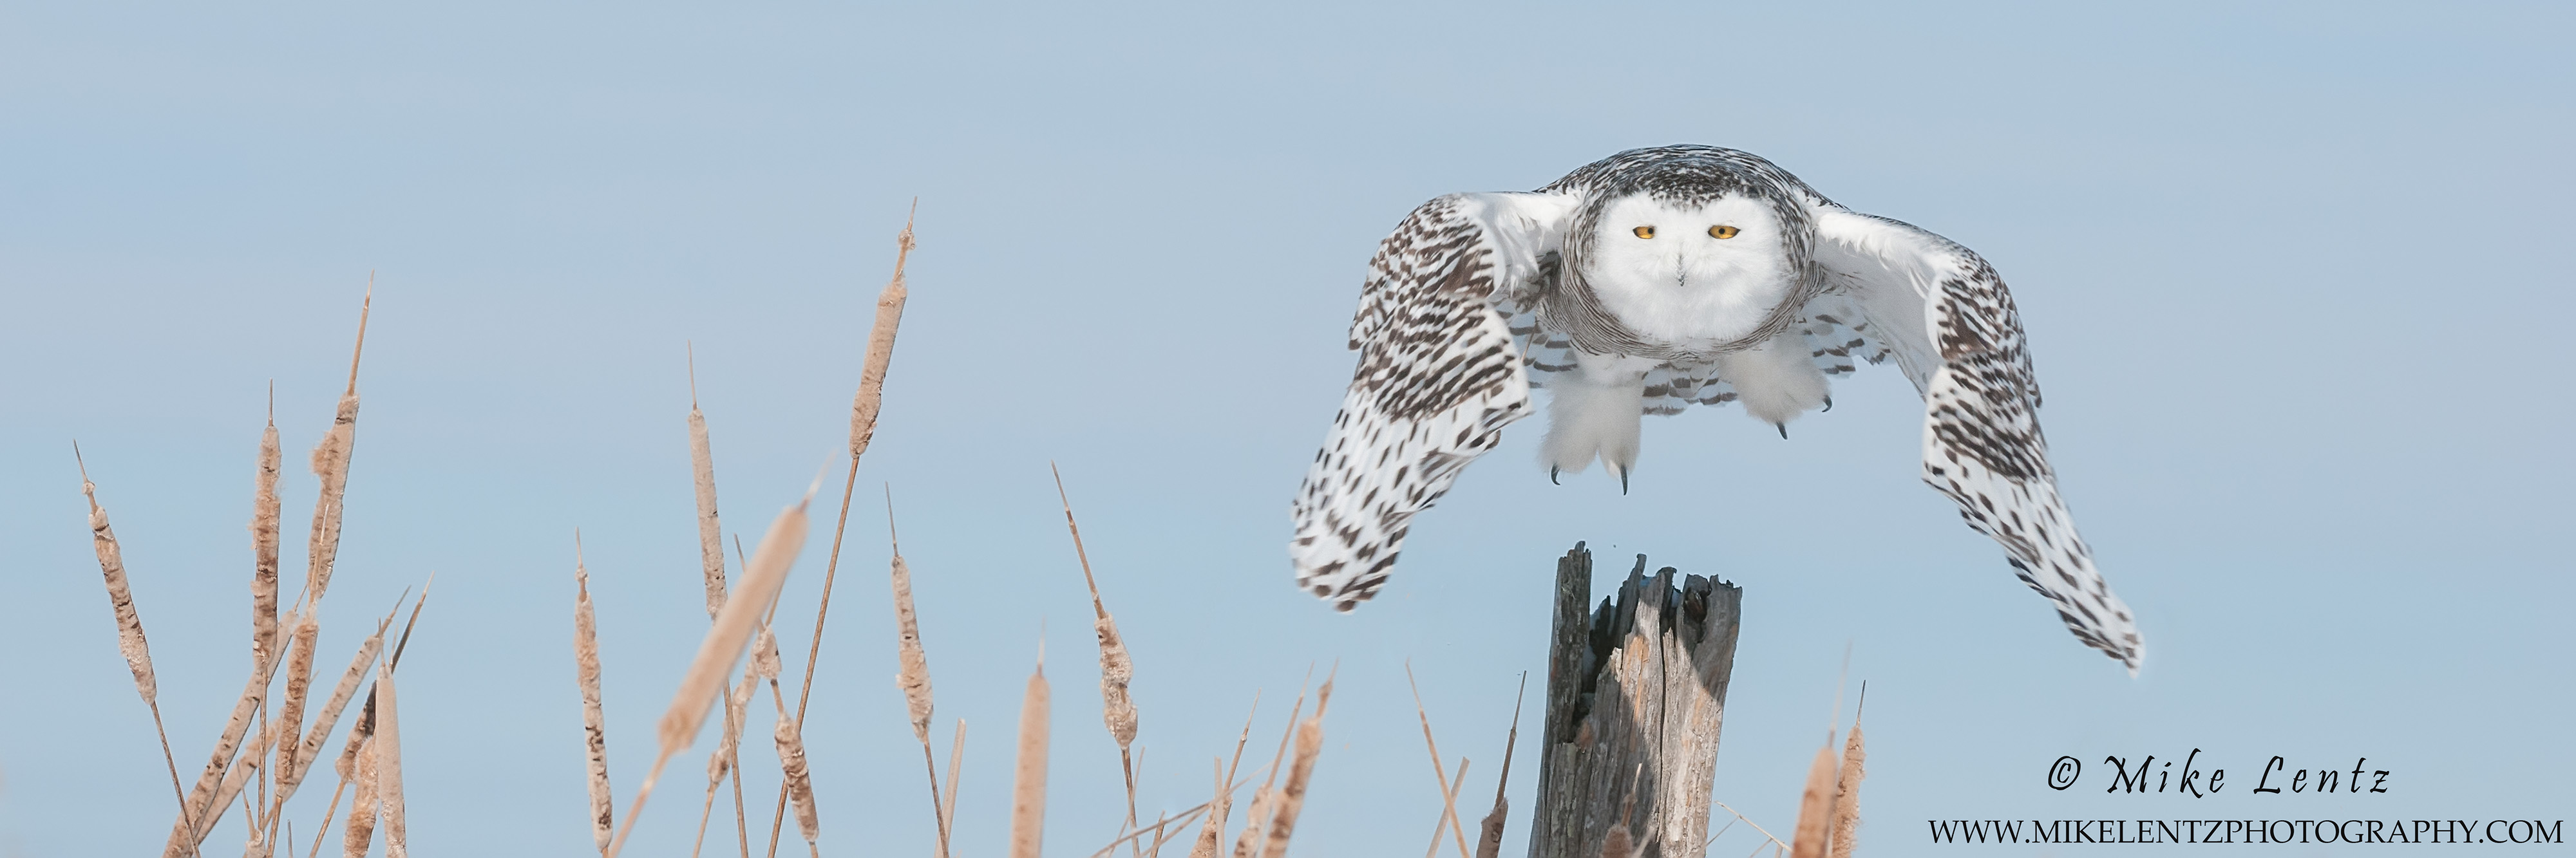 Snowy owl pano in cattails